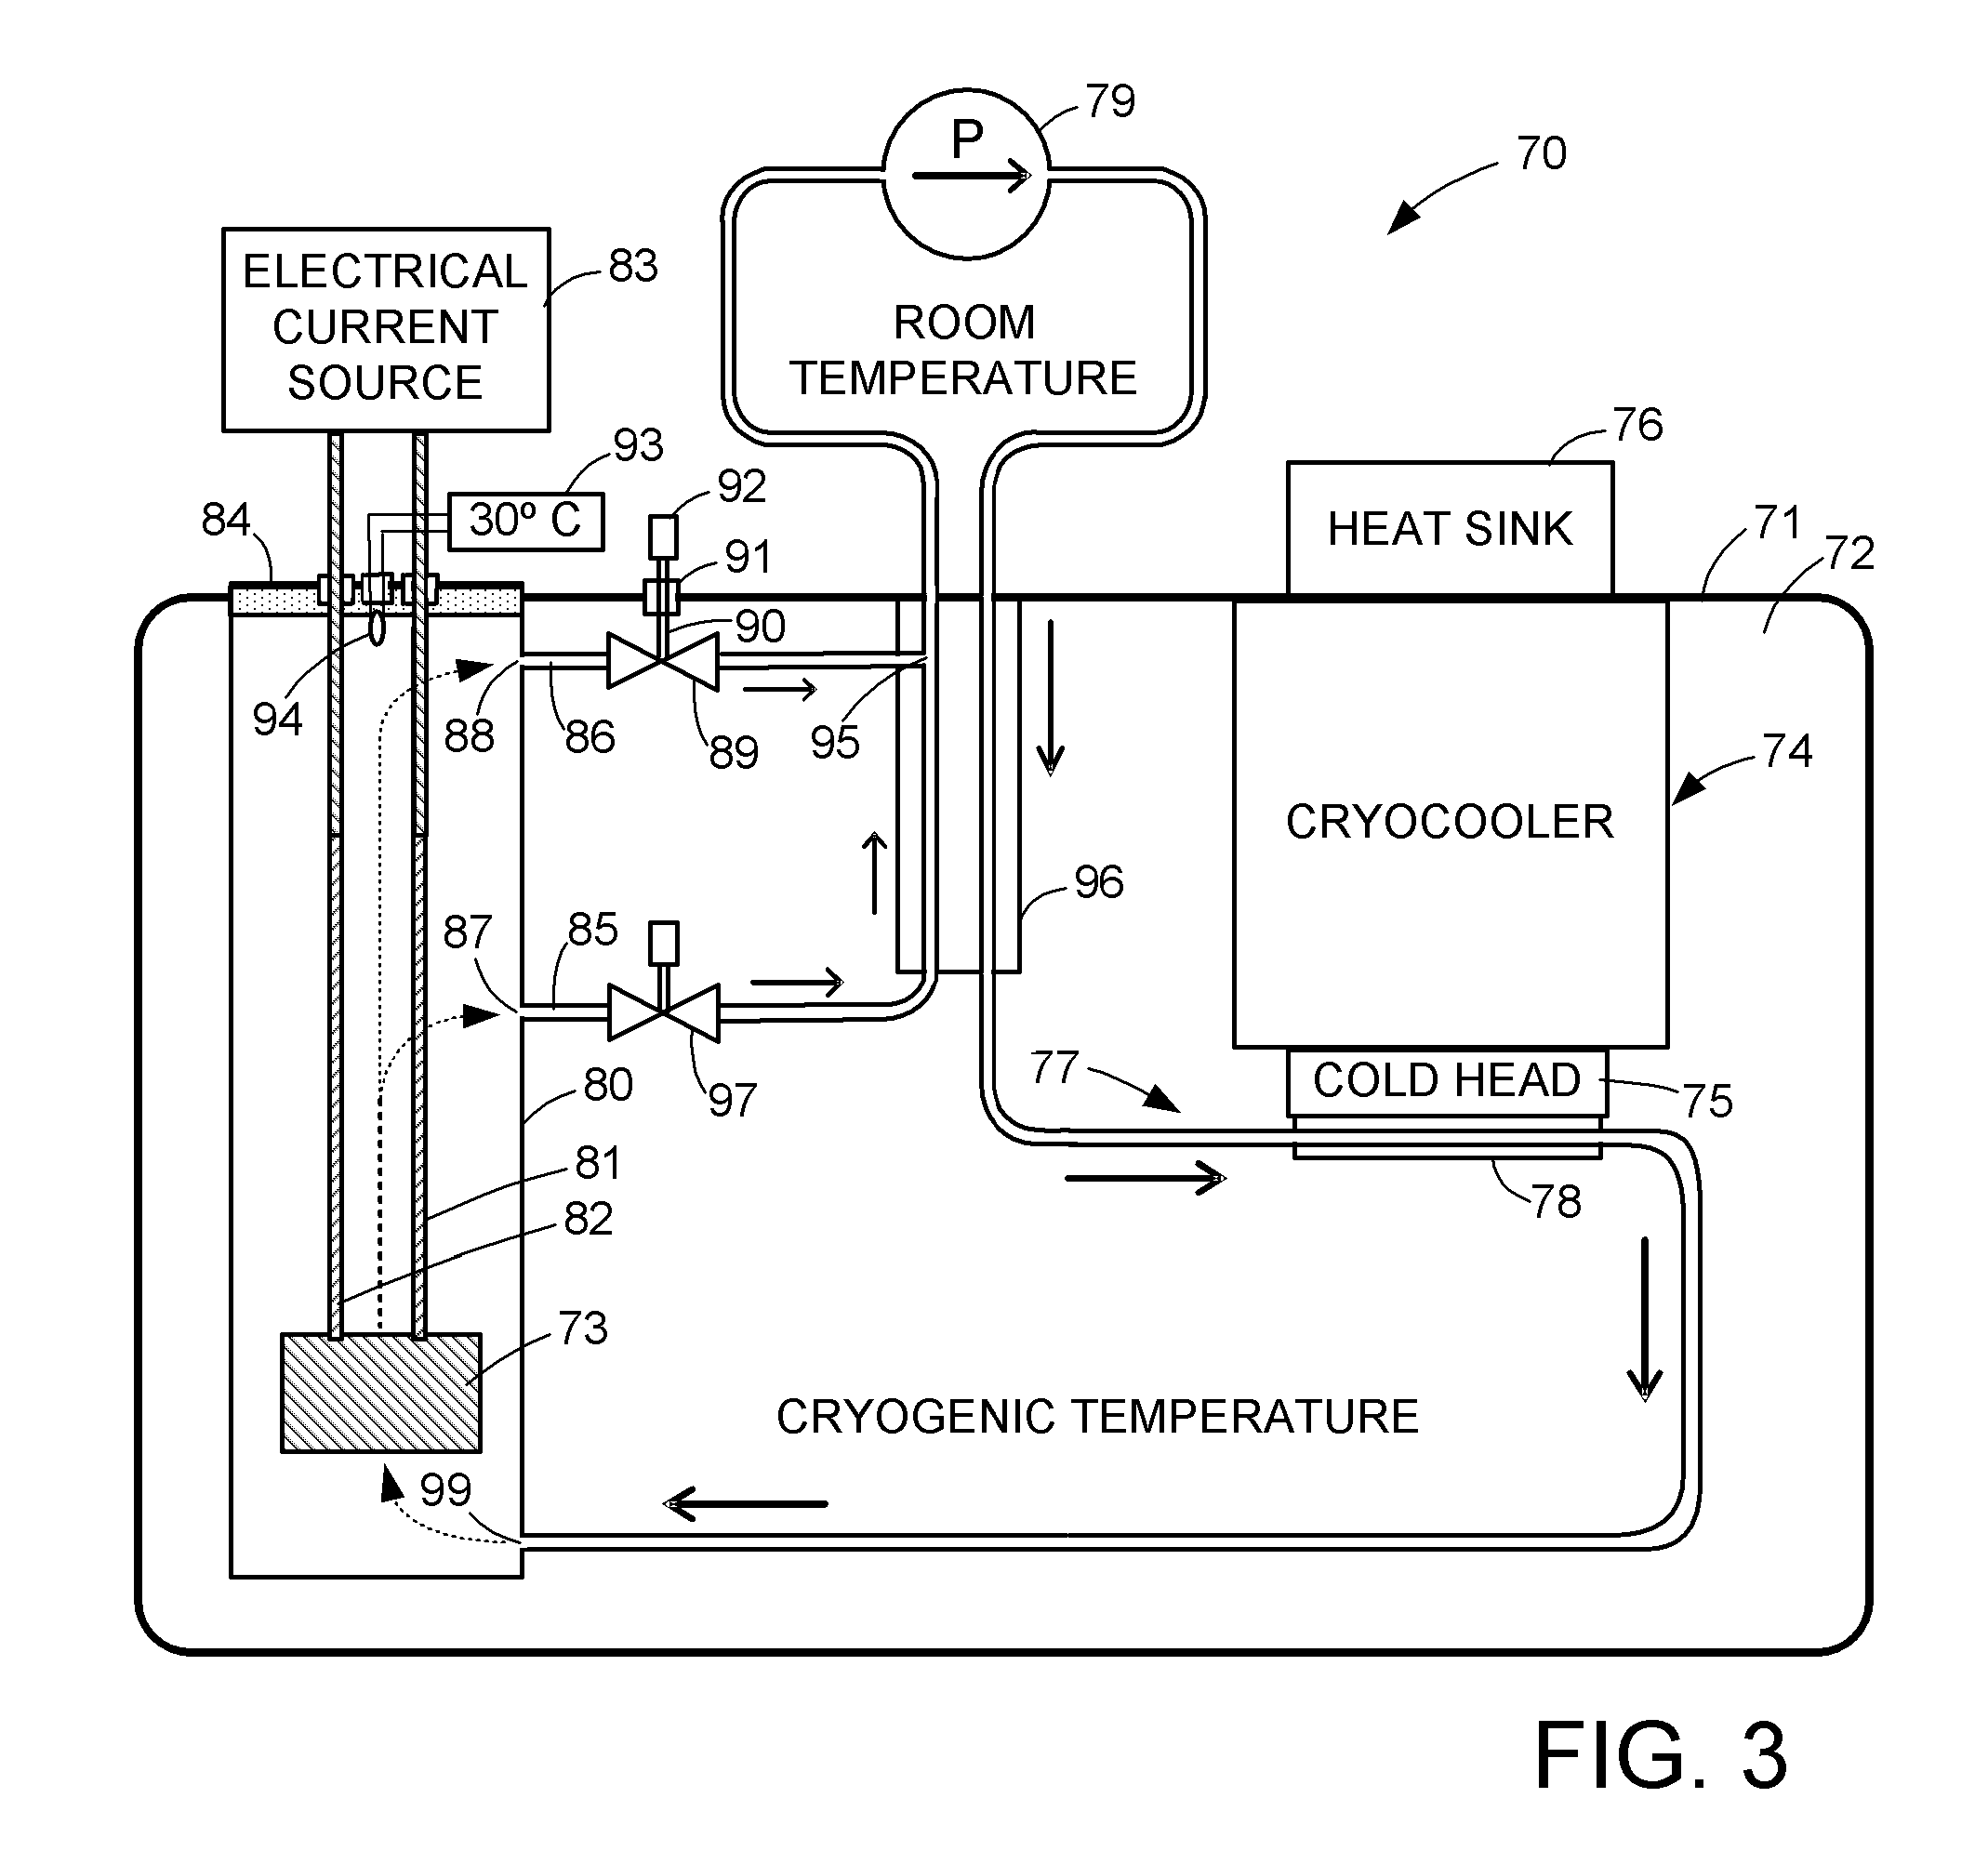 Cryogenic fluid circuit design for effective cooling of an elongated thermally conductive structure extending from a component to be cooled to a cryogenic temperature